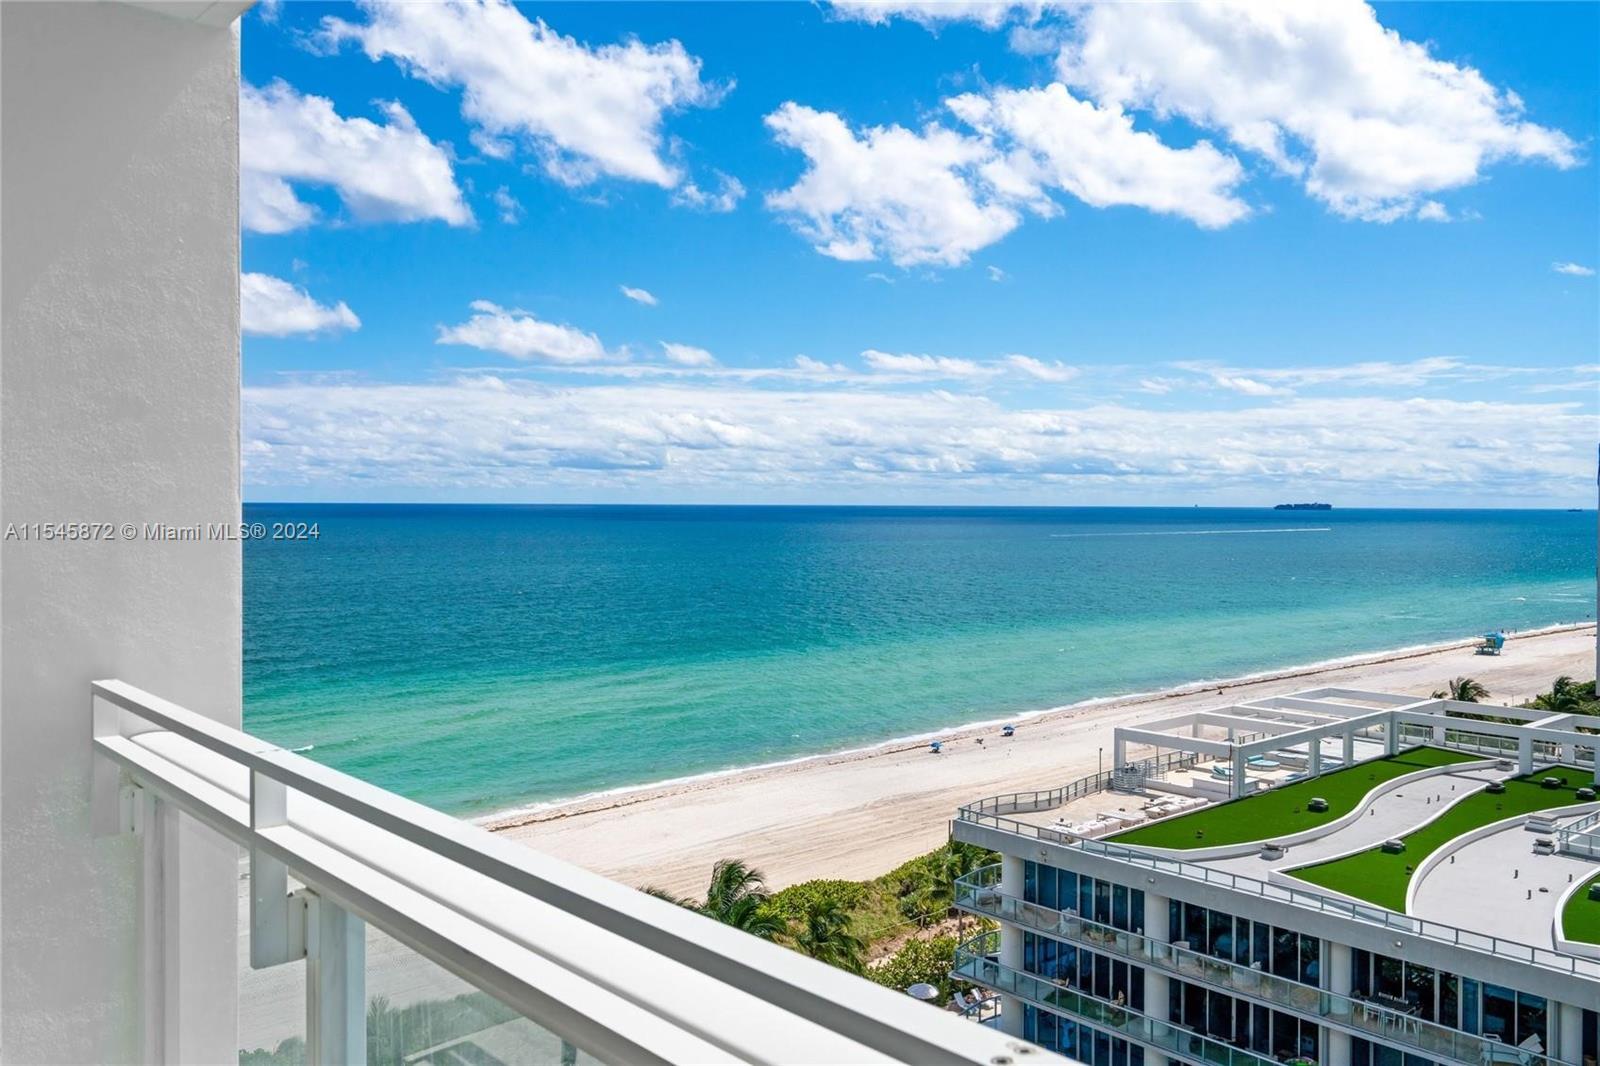 Expansive, amazing Ocean, Sunset and Pool Views! All white and bright, modern, Open concept floor plan. 2 BR opens for maximum views to the water, garden and more. Lots of storage. Brand new automatic blinds in all rooms. Top of the line finishes. Private entrance, lobby, valet in #1 Rated Wellness Residences.70,000 SF Gym, Hydrotherapy, 4 Pools, 2 Pilates Studios, 100's of classes weekly, Michelin Star Pop up Restaurant, Juice Bar, Rock Climbing Wall, Private Beach. Ownership includes nearly 70k annually in Wellness & Spa benefits, that no other oceanfront property offers!